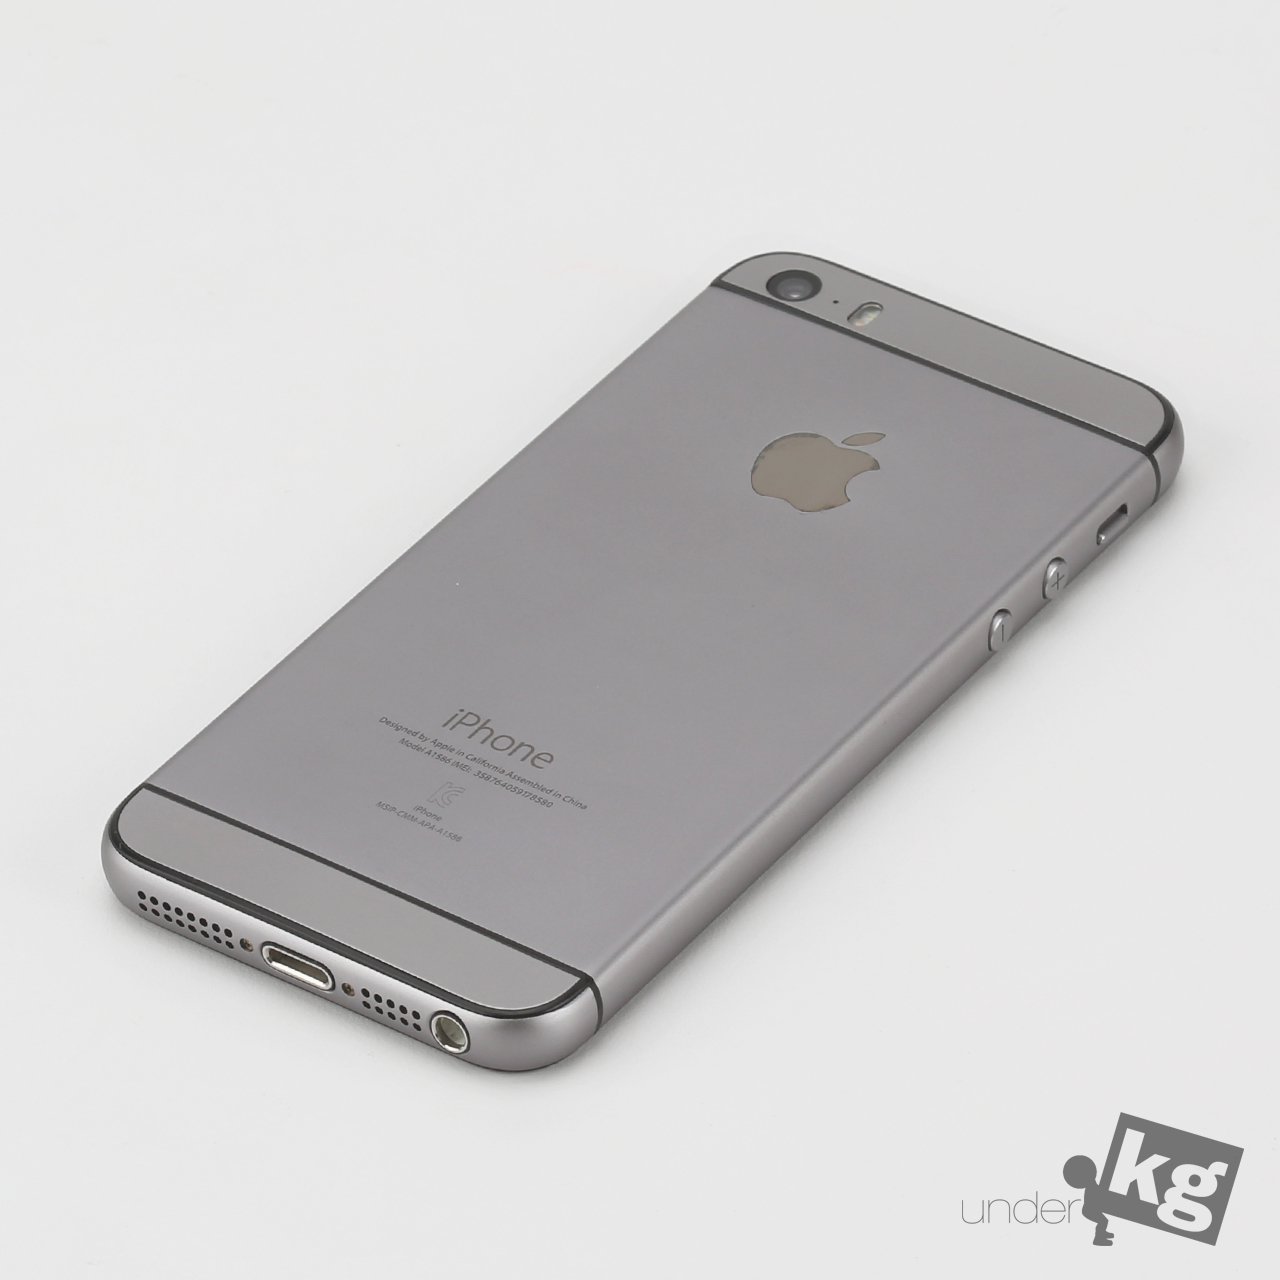 iphone5s-to-iphone6-housing-change-pic4.jpg